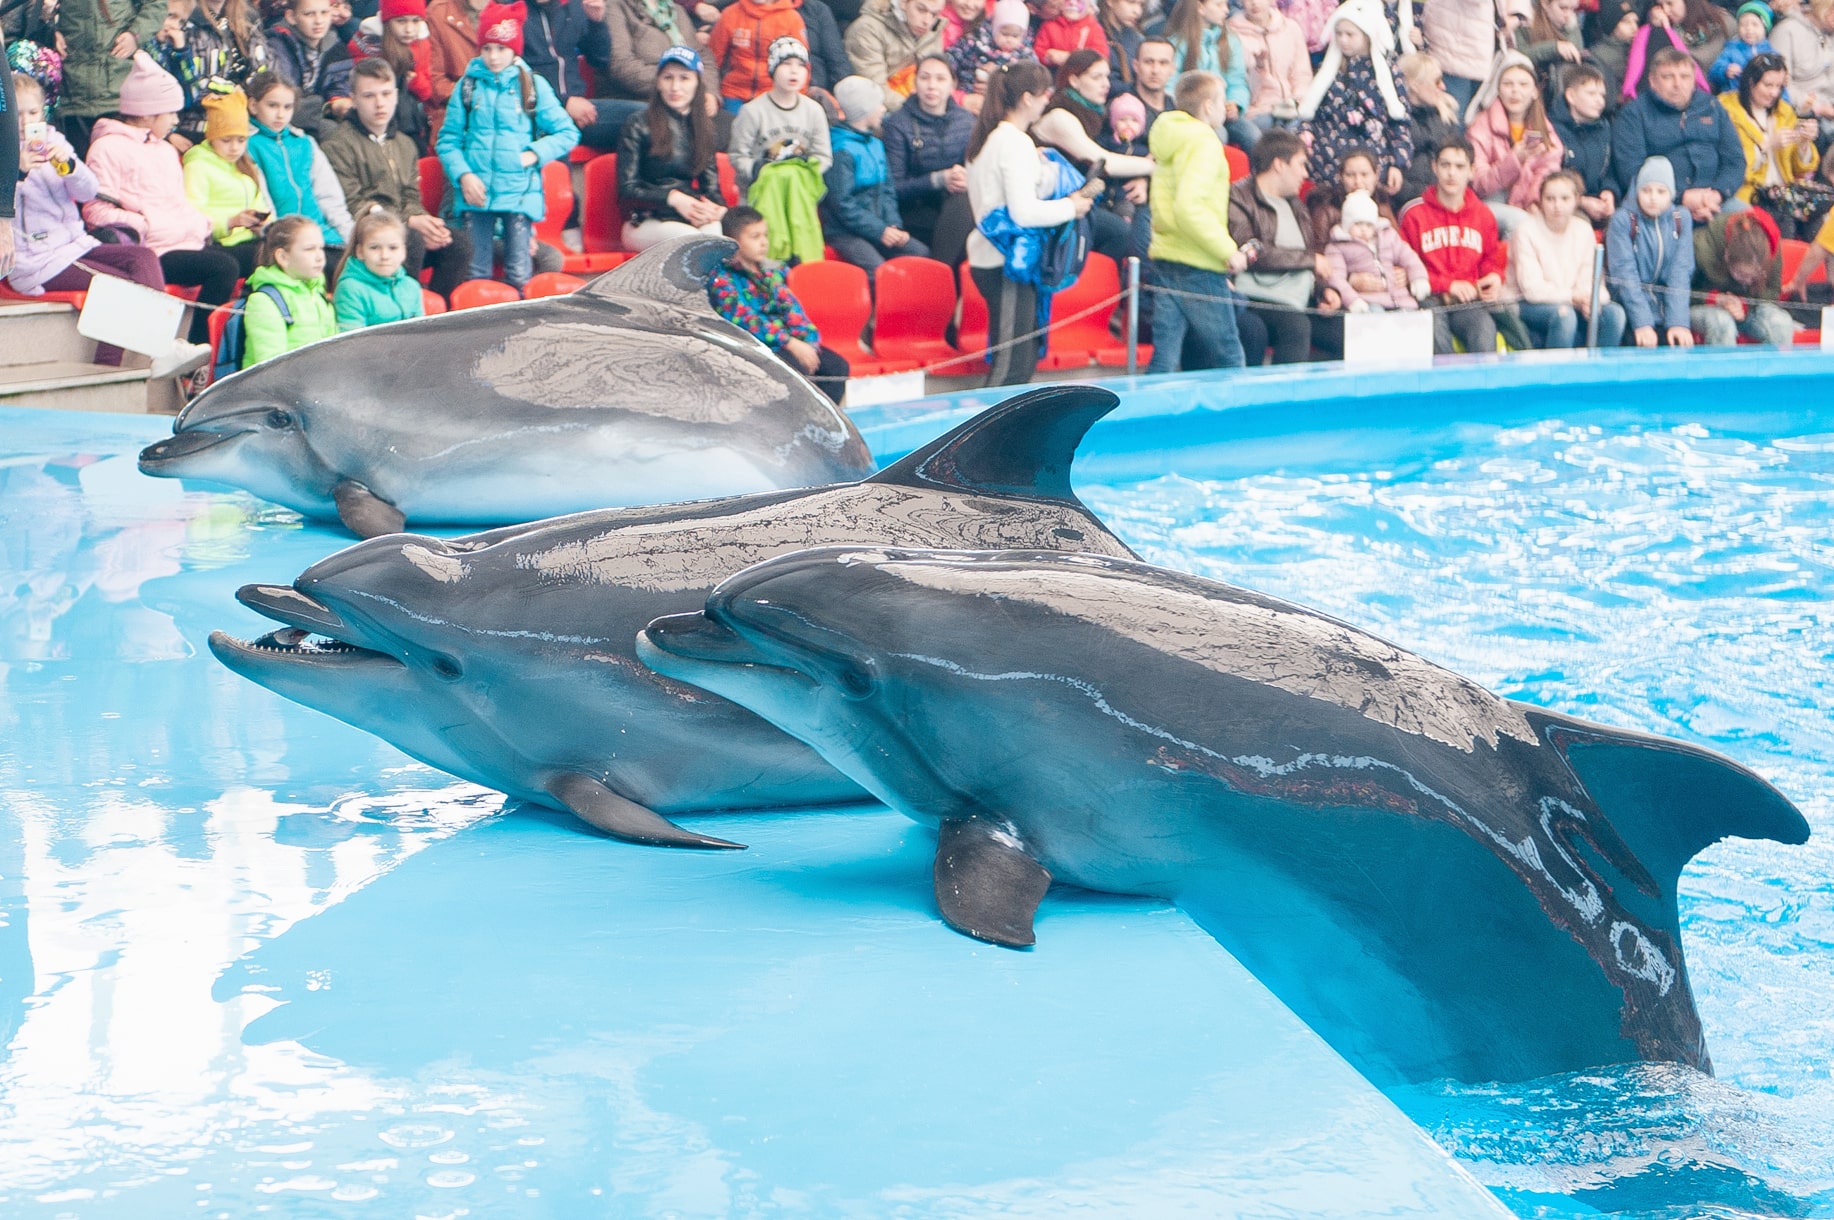 Dolphins of Sochi Park